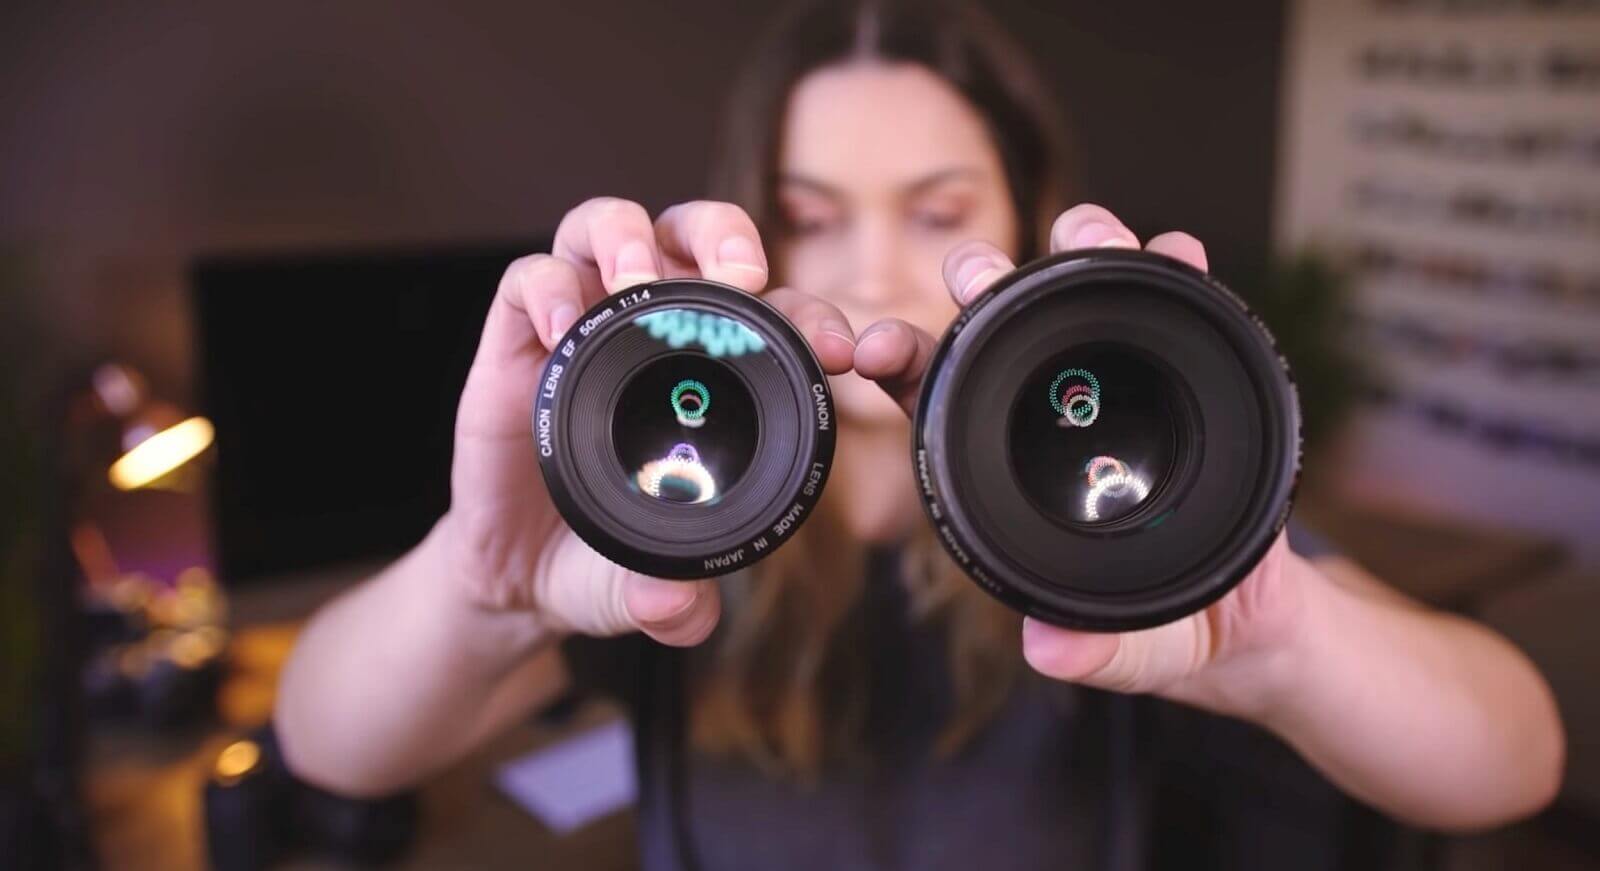 Best Canon Lens for Portraits - 50mm f1.4 vs. 50mm f1.2